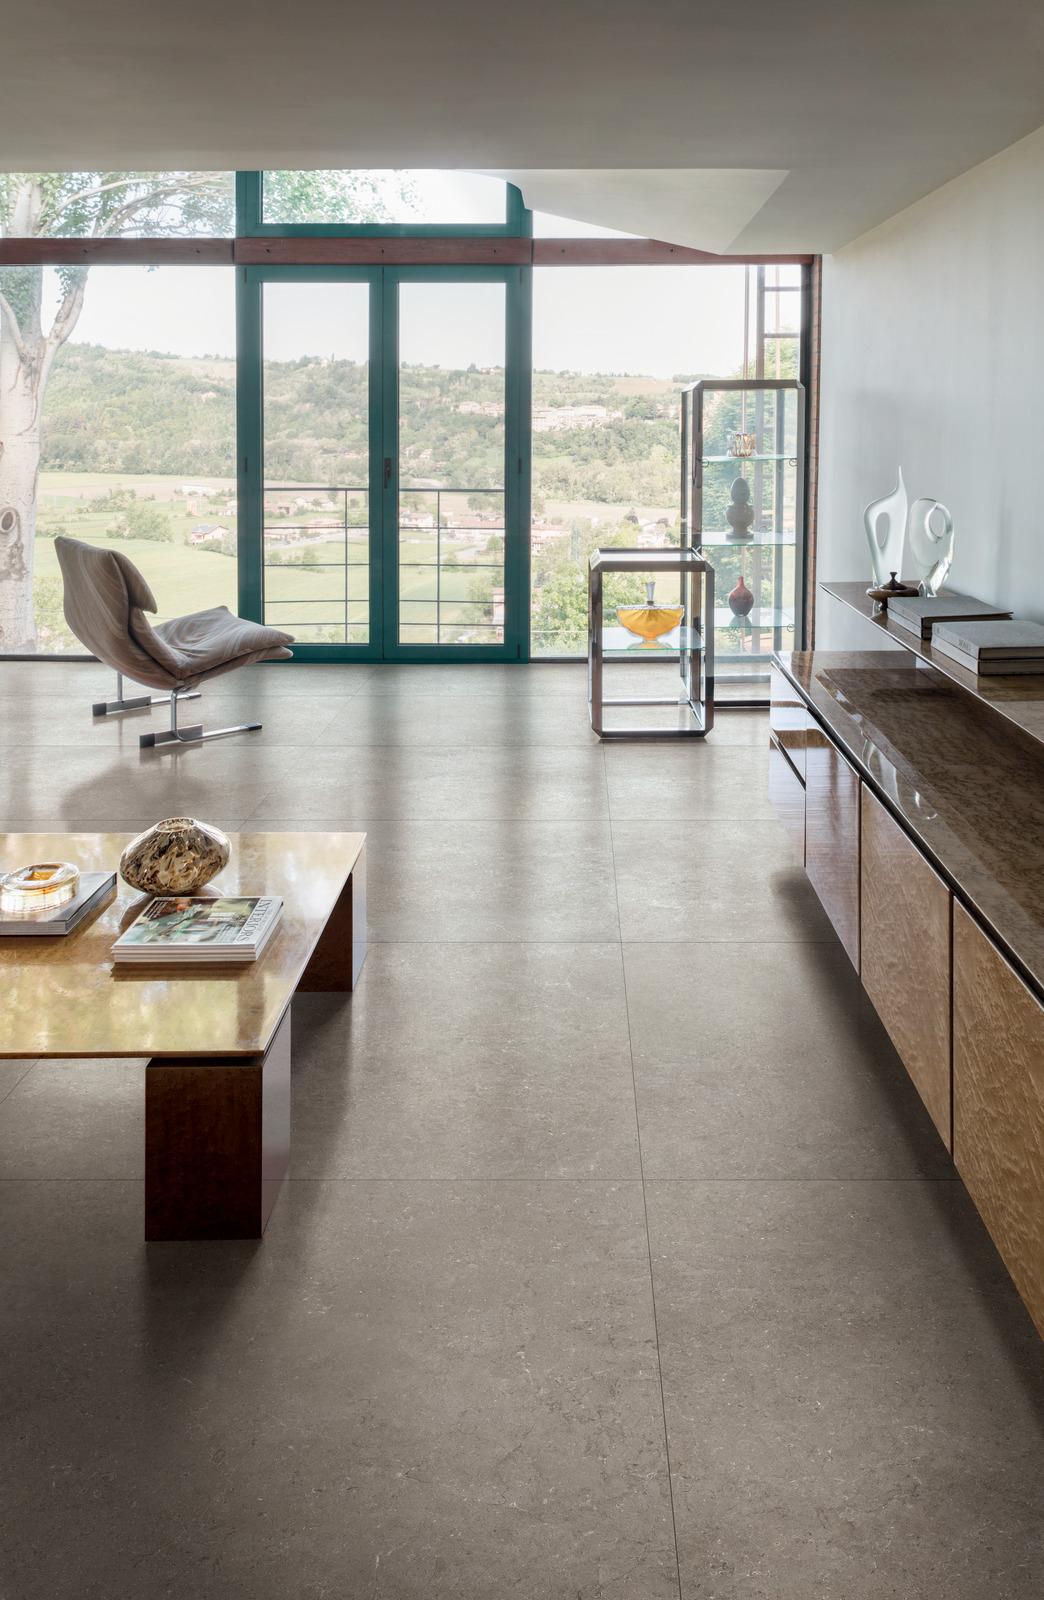 limestone effect tiles , kitchen design with a floor to ceiling windows and marble style storage surface